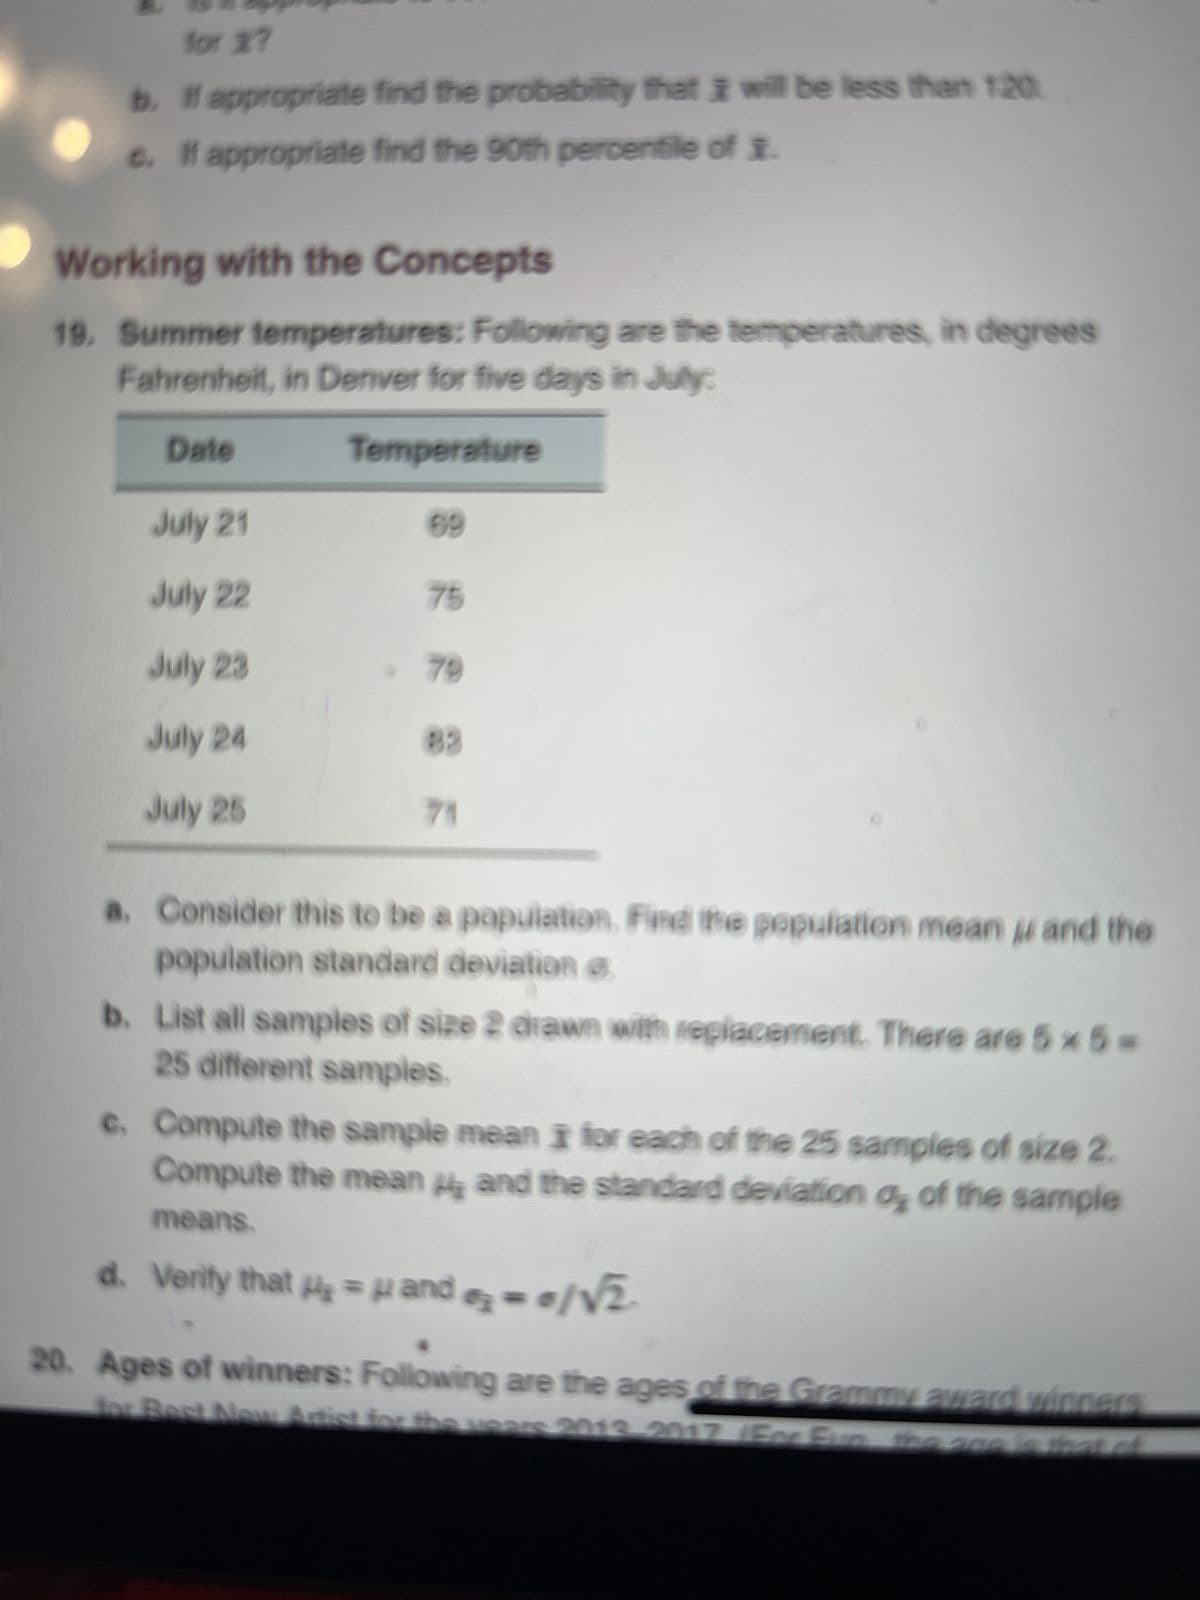 for x?
b. If appropriate find the probability that I will be less than 120
c. If appropriate find the 90th percentile of
Working with the Concepts
19. Summer temperatures: Following are the temperatures, in degrees
Fahrenheit, in Denver for five days in July:
Date
Temperature
July 21
July 22
July 23
July 24
July 25
69
75
79
83
71
a. Consider this to be a population. Find the population mean and the
population standard deviation e
b. List all samples of size 2 drawn with replacement. There are 5 x 5=
25 different samples.
c. Compute the sample mean I for each of the 25 samples of size 2.
Compute the mean and the standard deviation of the sample
means.
d. Verity that μ₂ = μ and=0/√₂-
20. Ages of winners: Following are the ages of the Grammy award winners
for Best New Artist for the years 2013-2017 (For Fun the age is that of